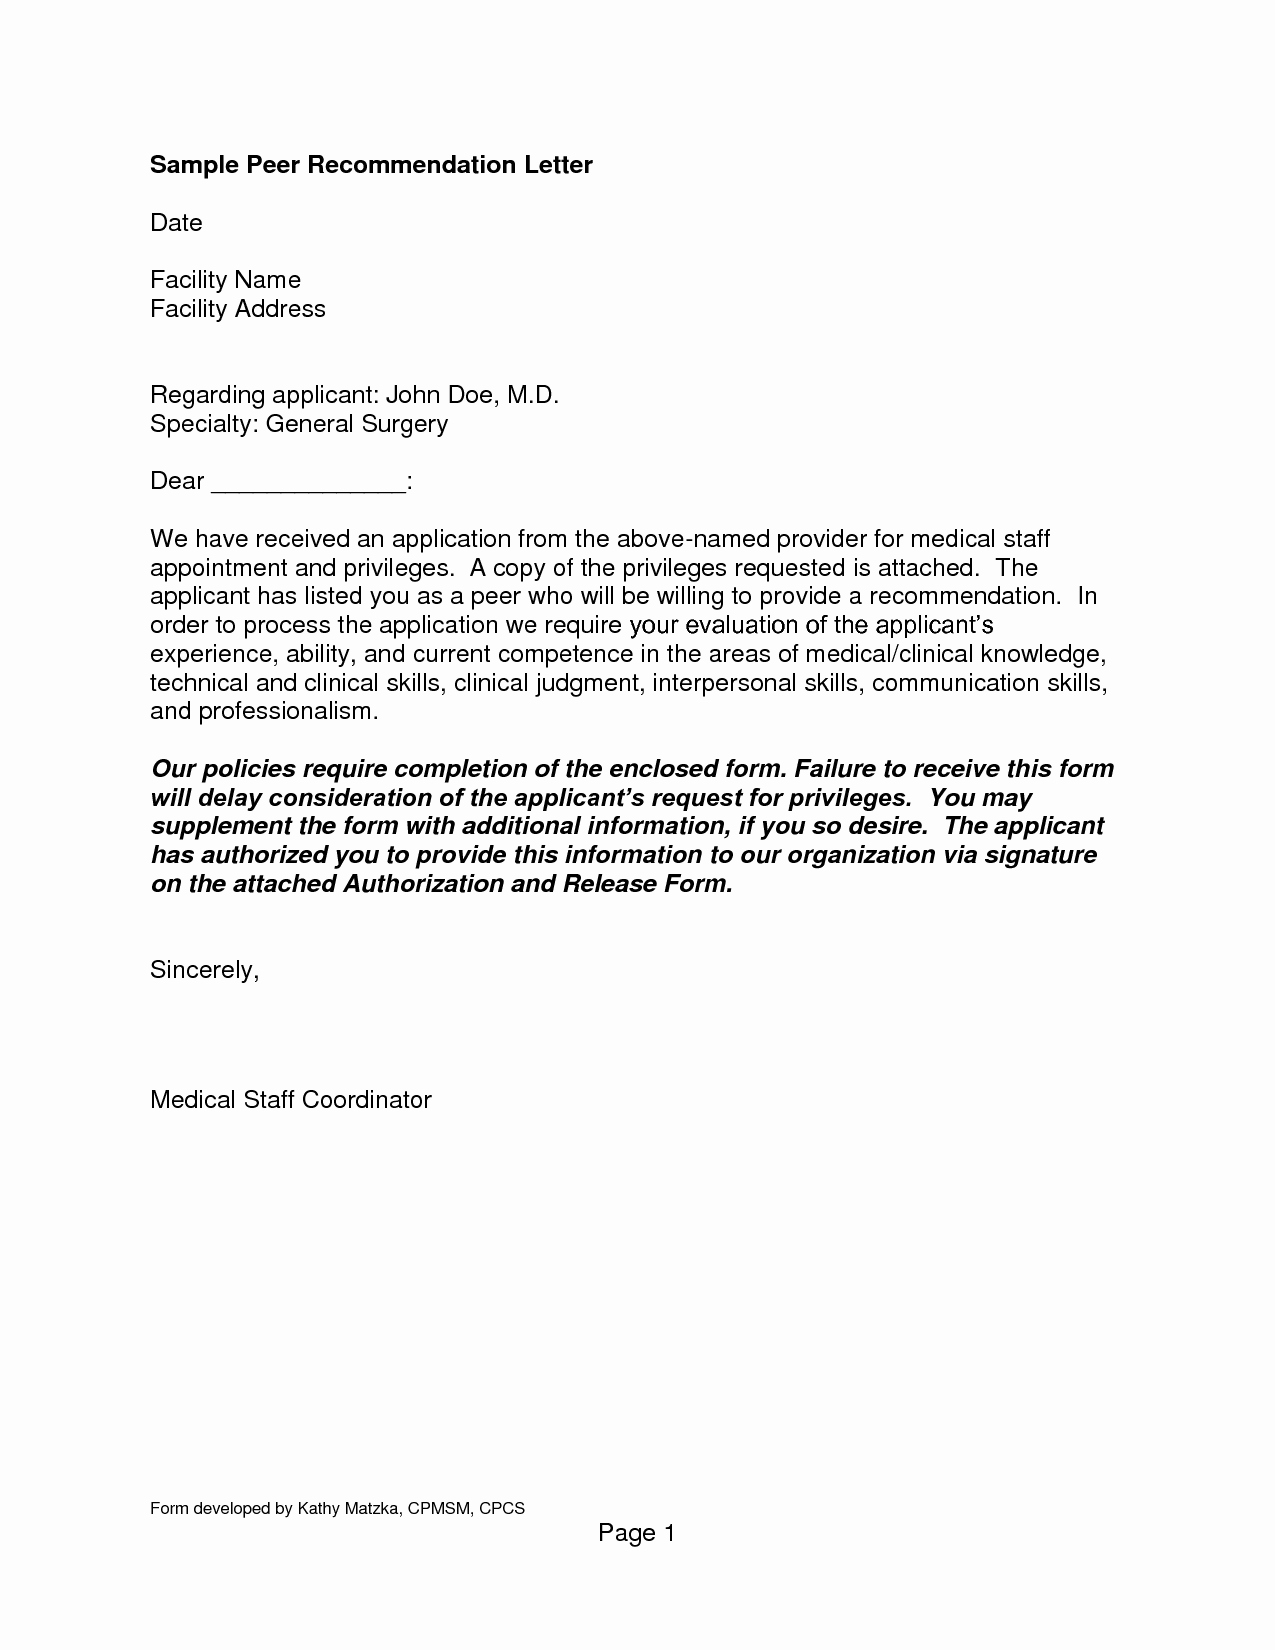 Format Of A Recomendation Letter New Reference Letter Template Letter Of Re Mendation format